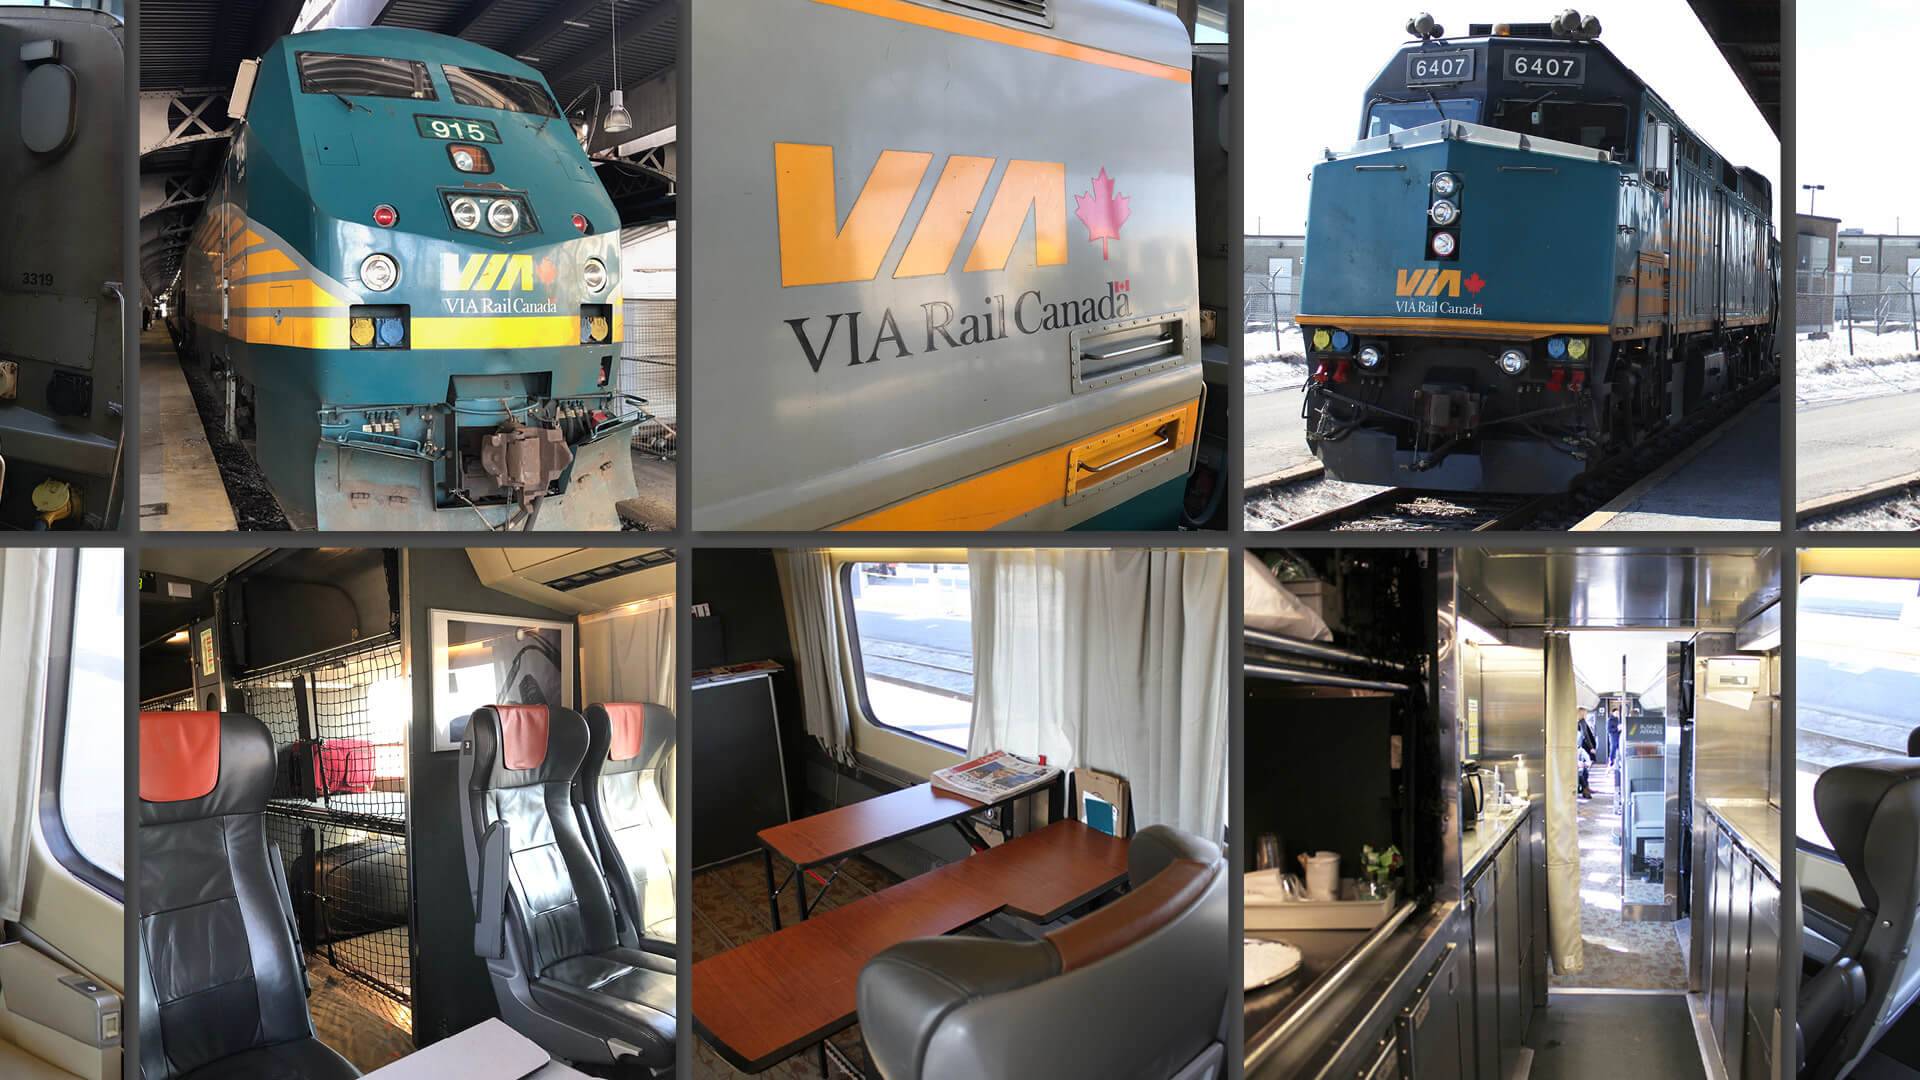 Research Images of Via Rail's existing trains